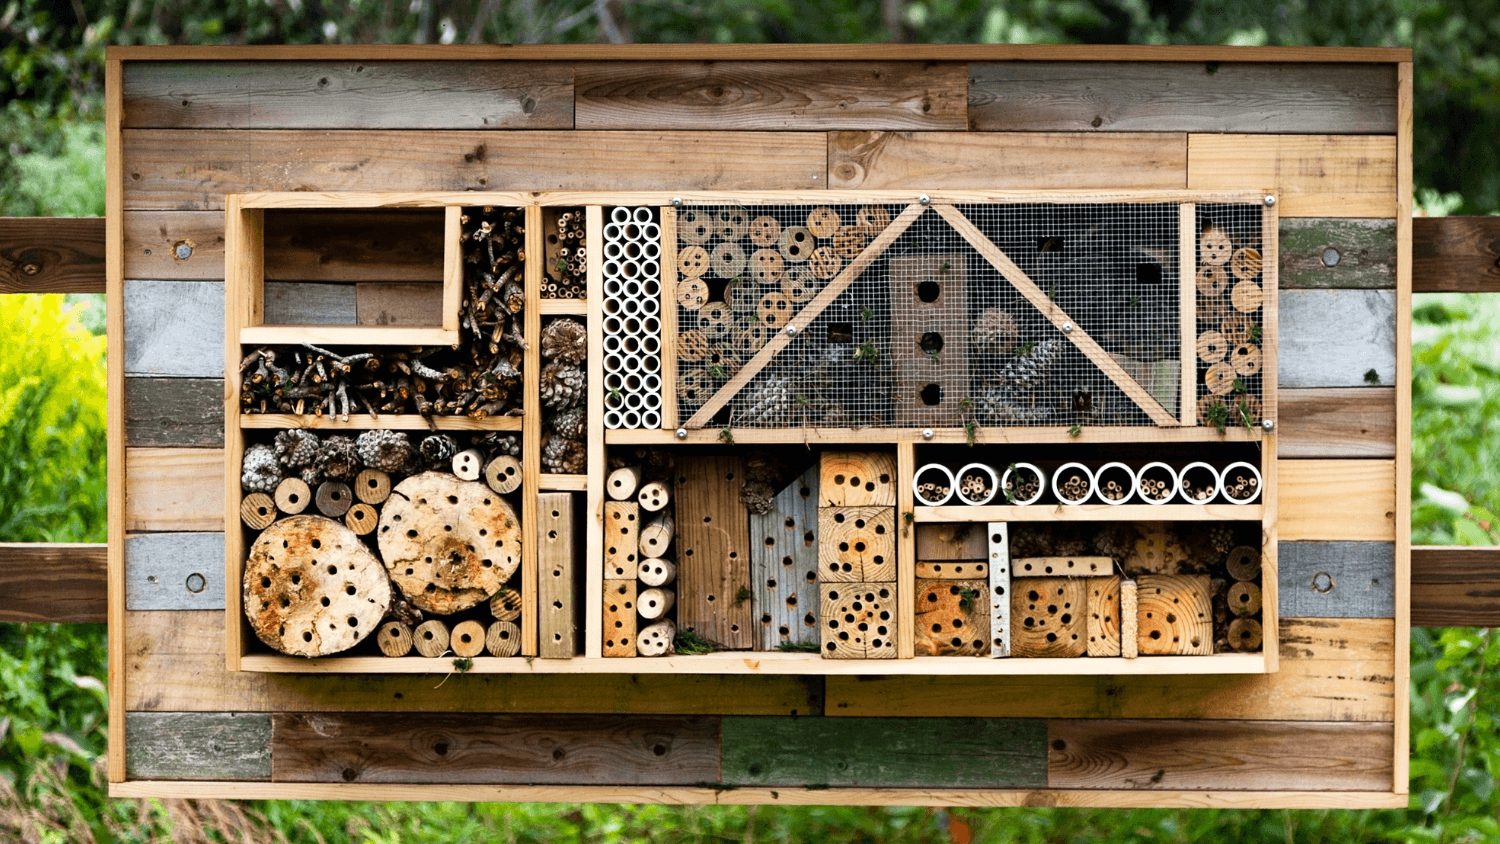 Several wooden blocks with hotels arrange along a wooden wall for bees to take refuge in.